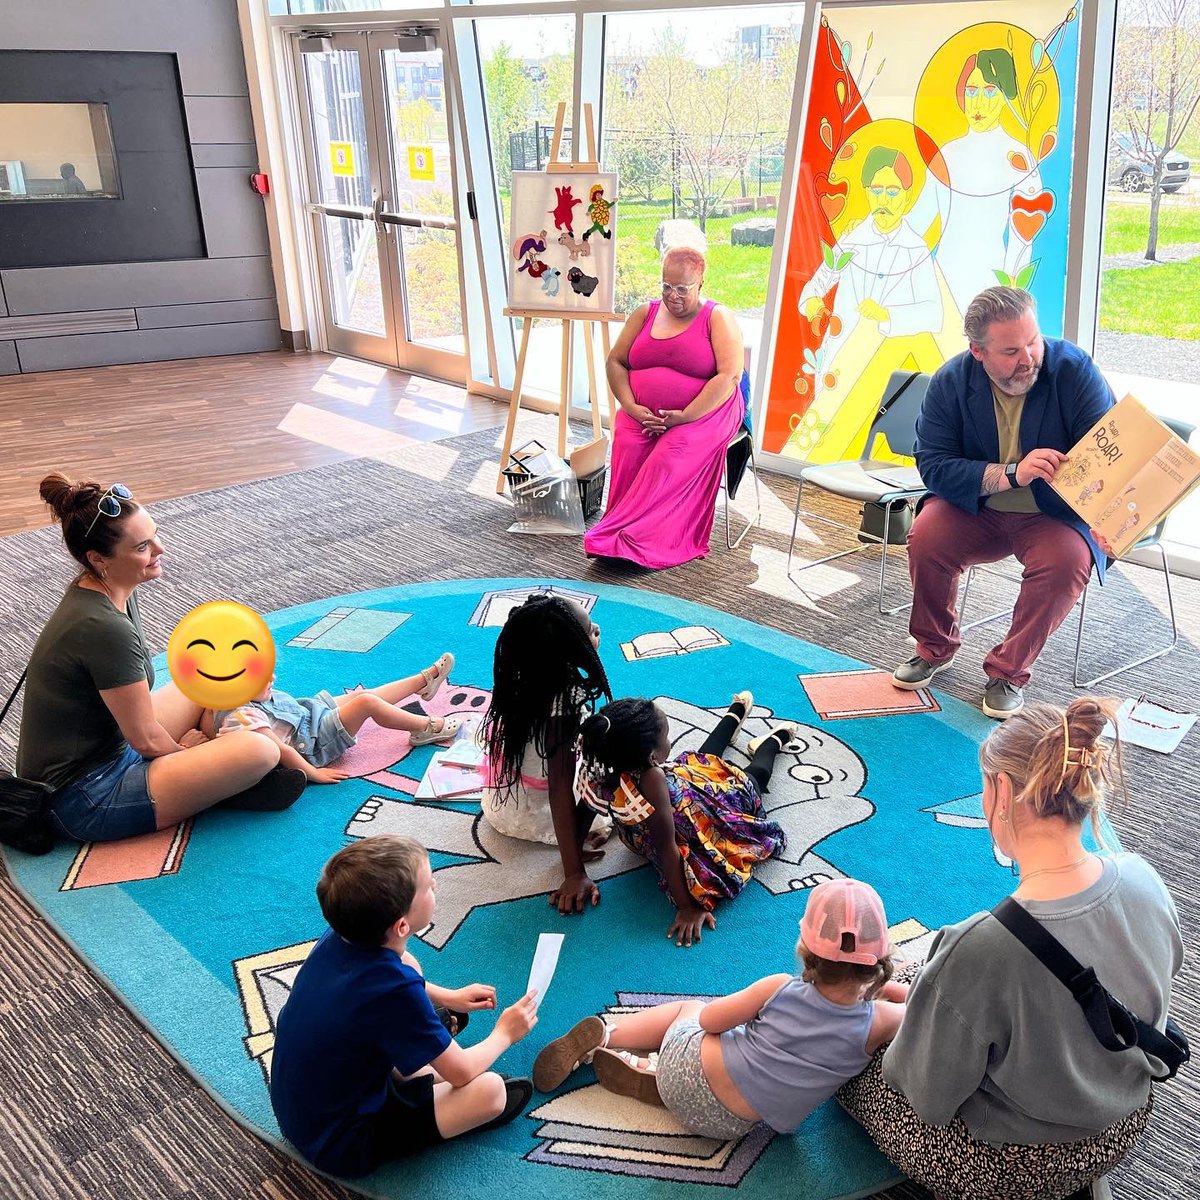 In advance of @manualcinema’s visit to Calgary with their magical production of “Leonardo the Terrible Monster”, members of the @yycARTS team traveled to @calgarylibrary locations across the city to read Mo Willems’ beautiful book! @yycARTSed